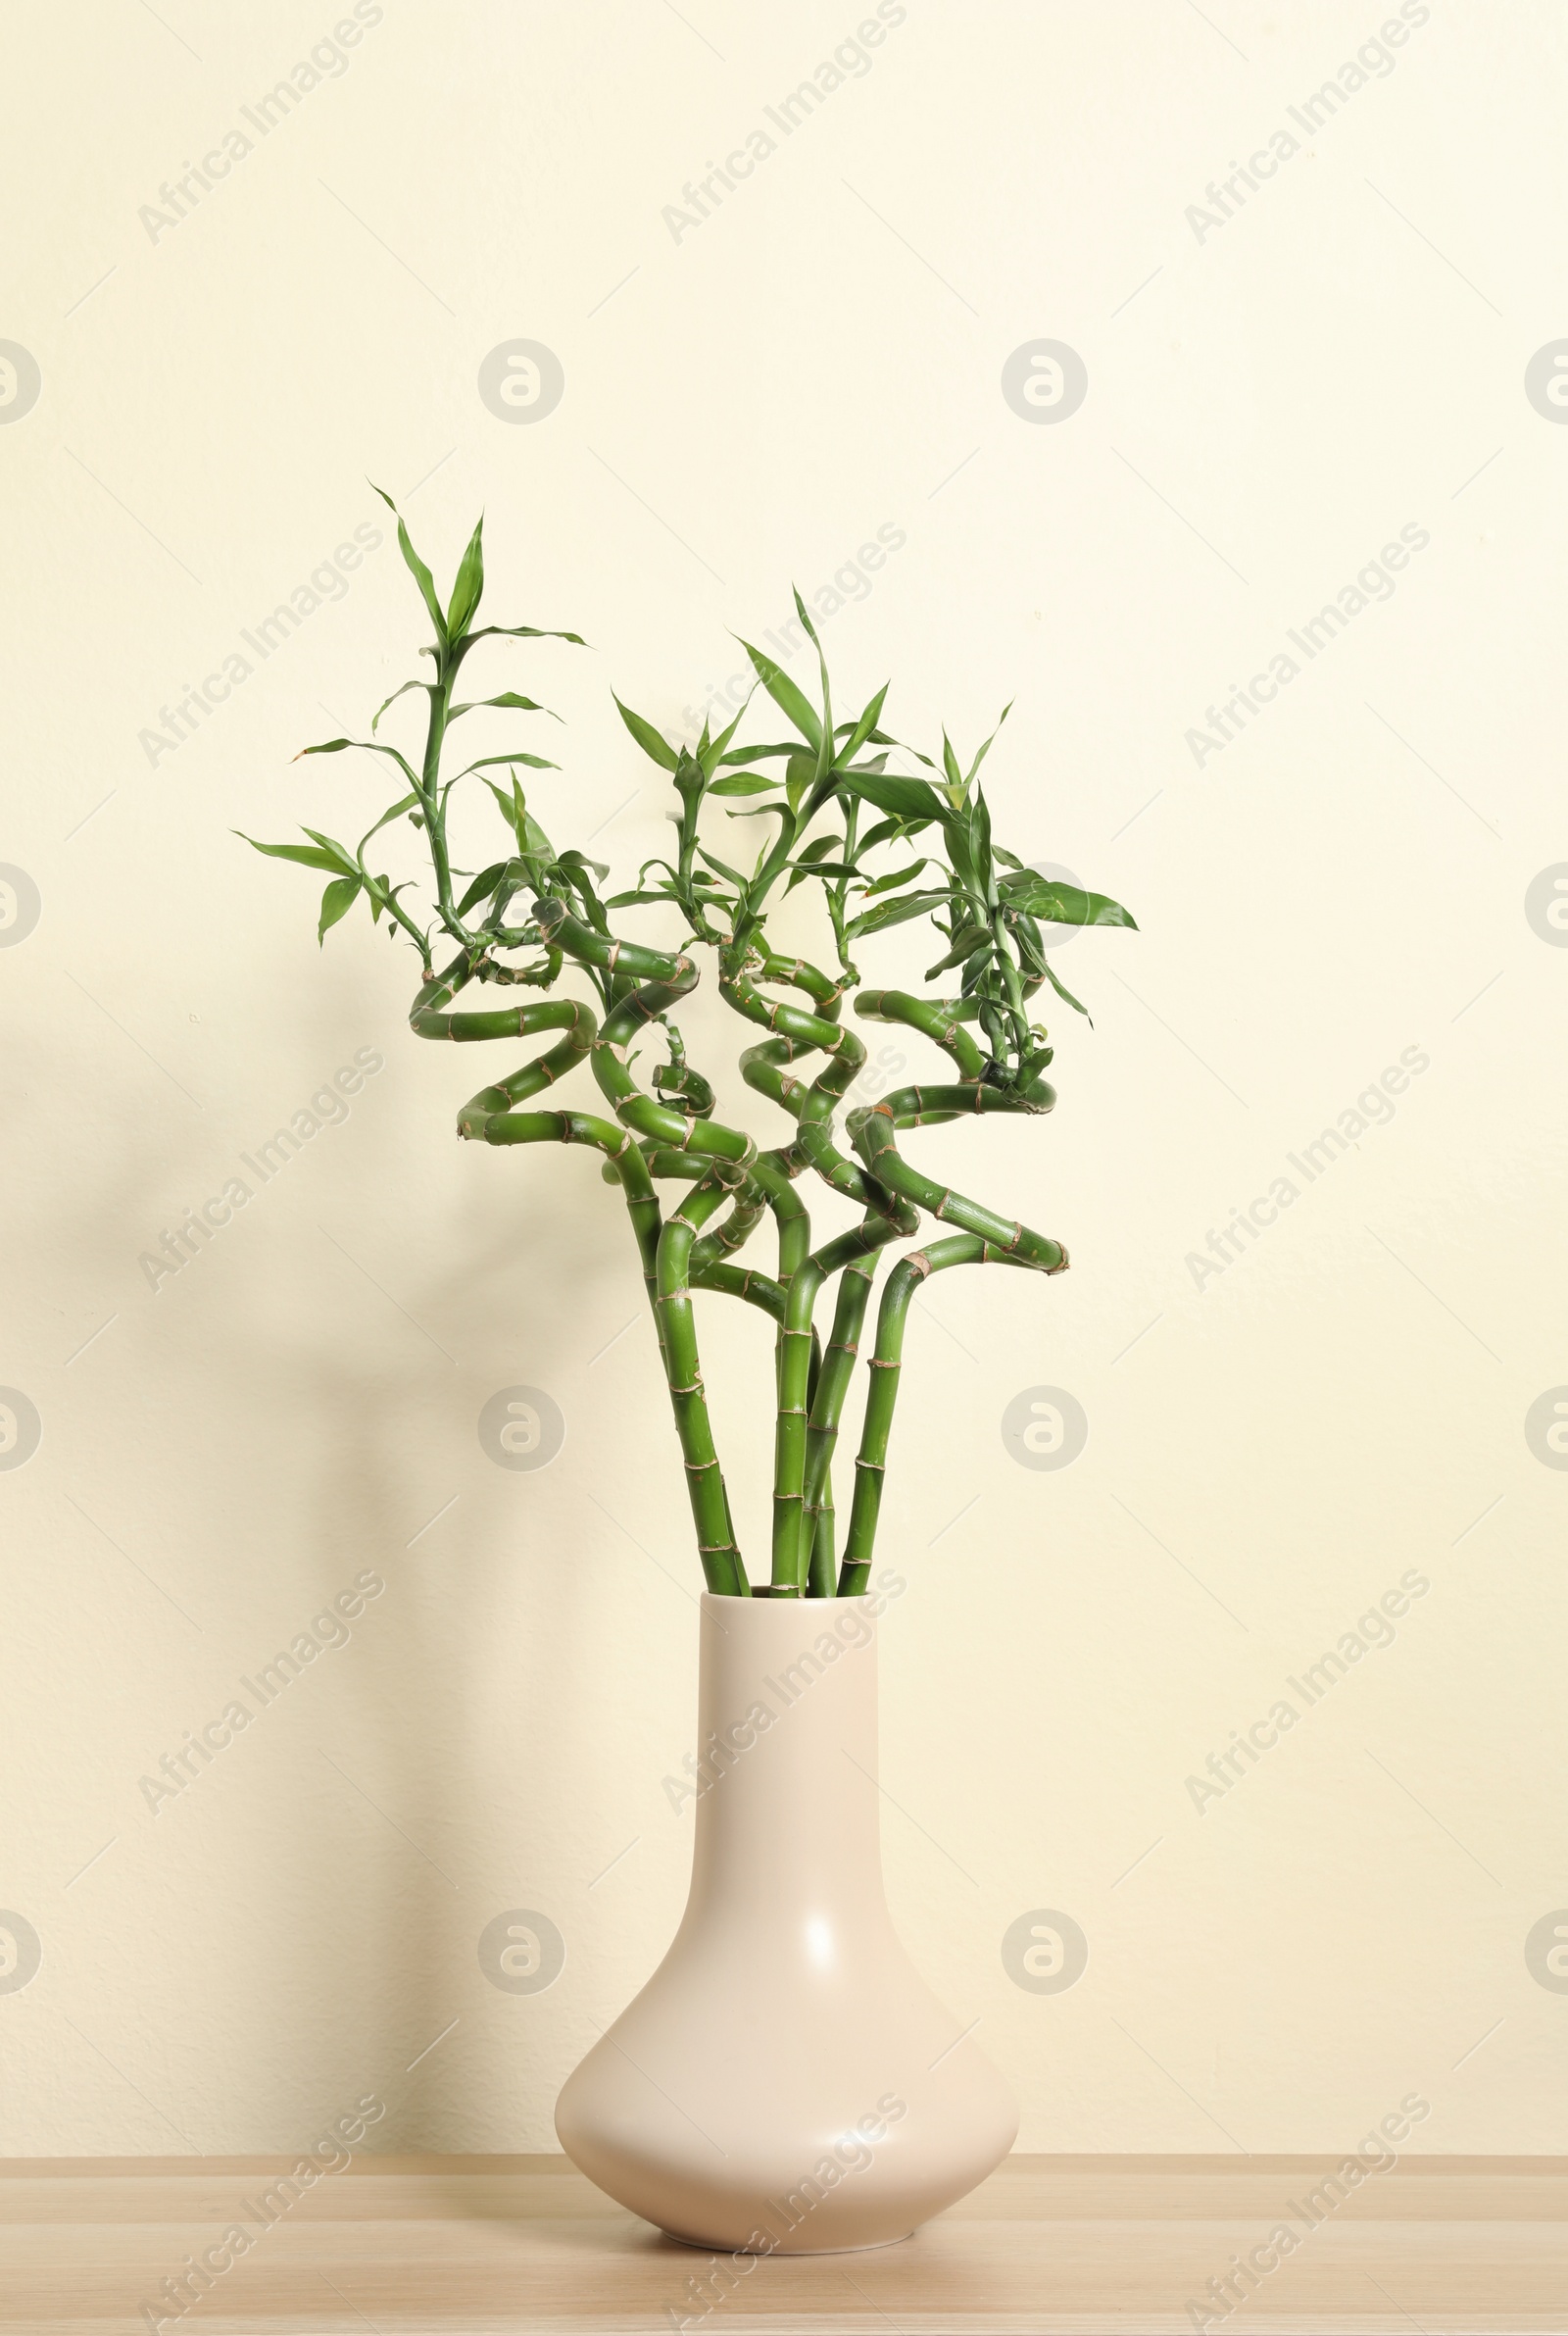 Photo of Vase with bamboo stems on wooden table against beige wall